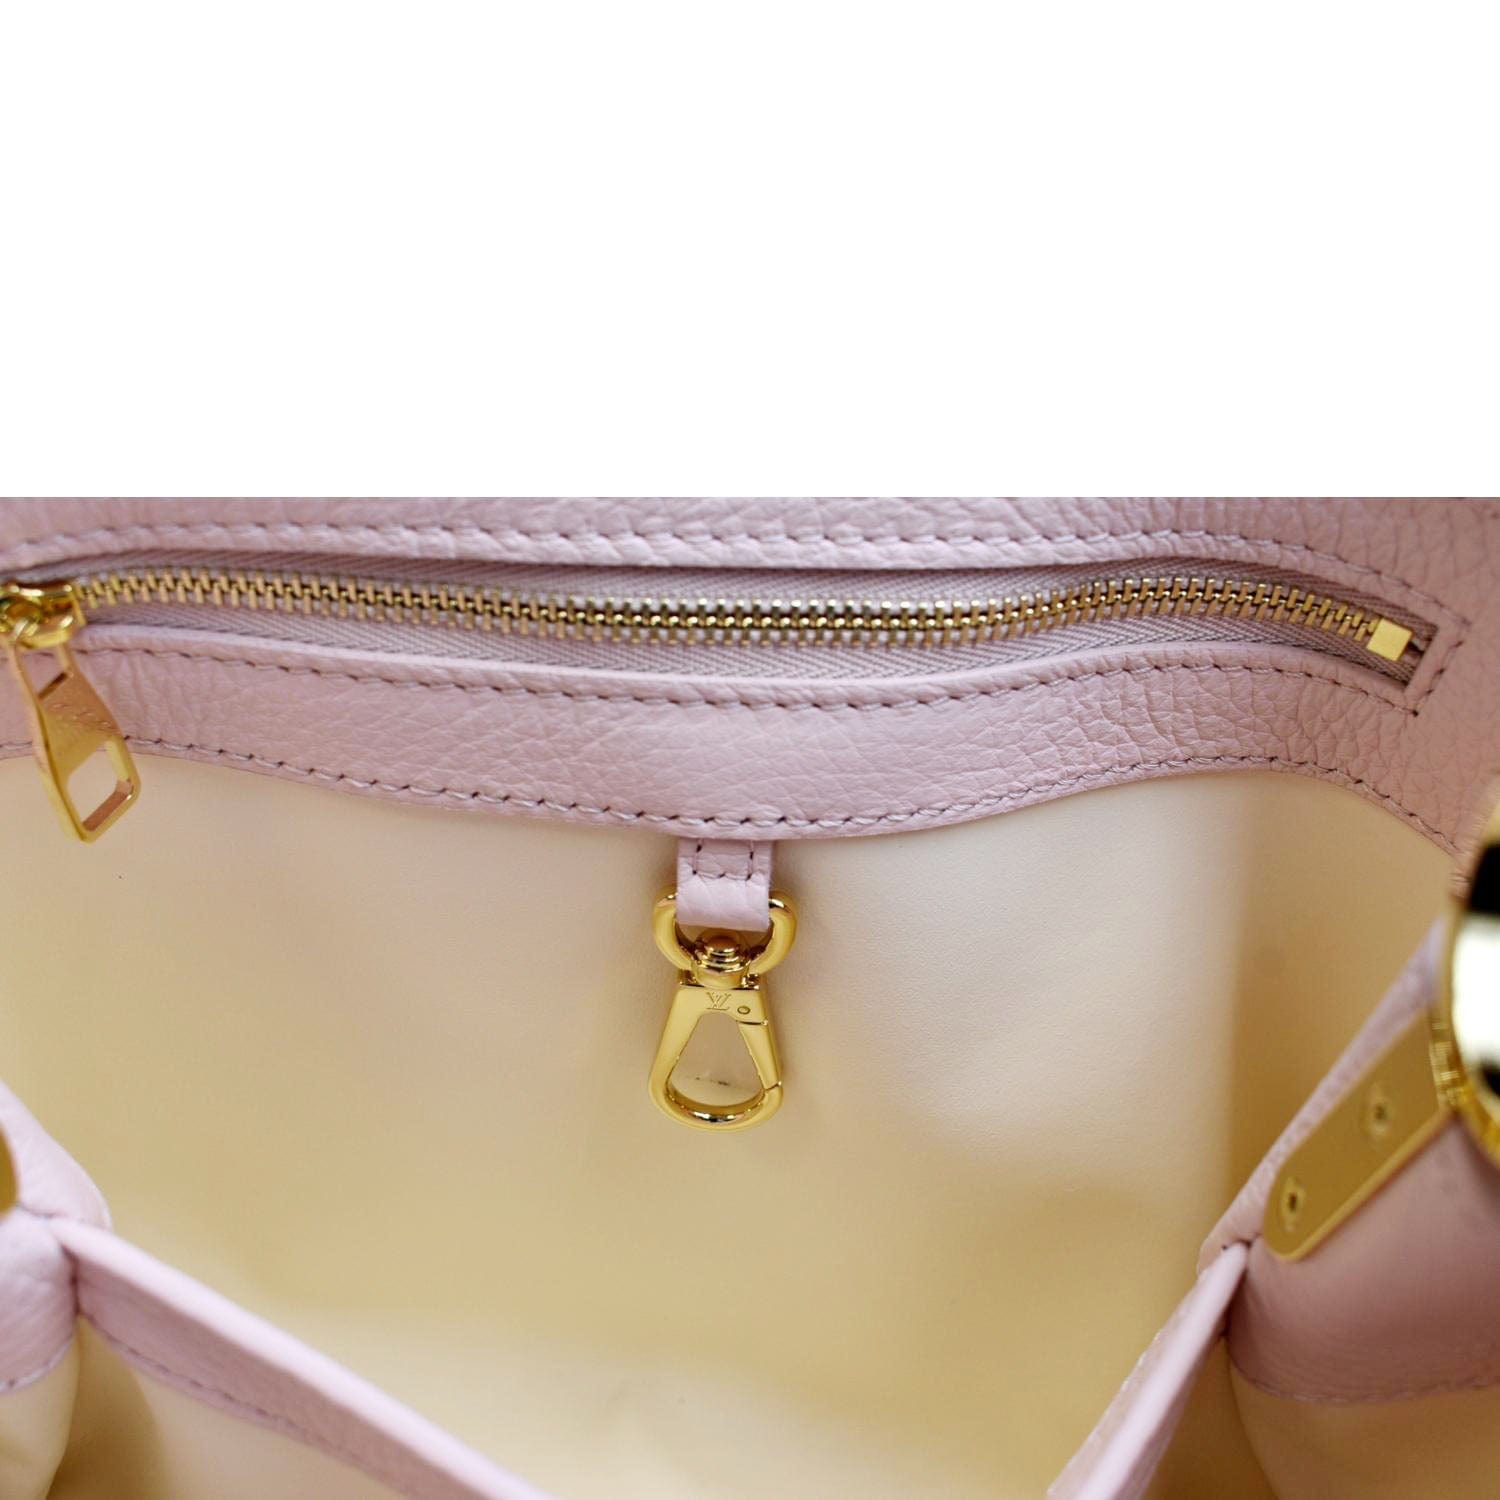 MEDIUM TRIOMPHE BELT IN TAURILLON LEATHER - NUDE